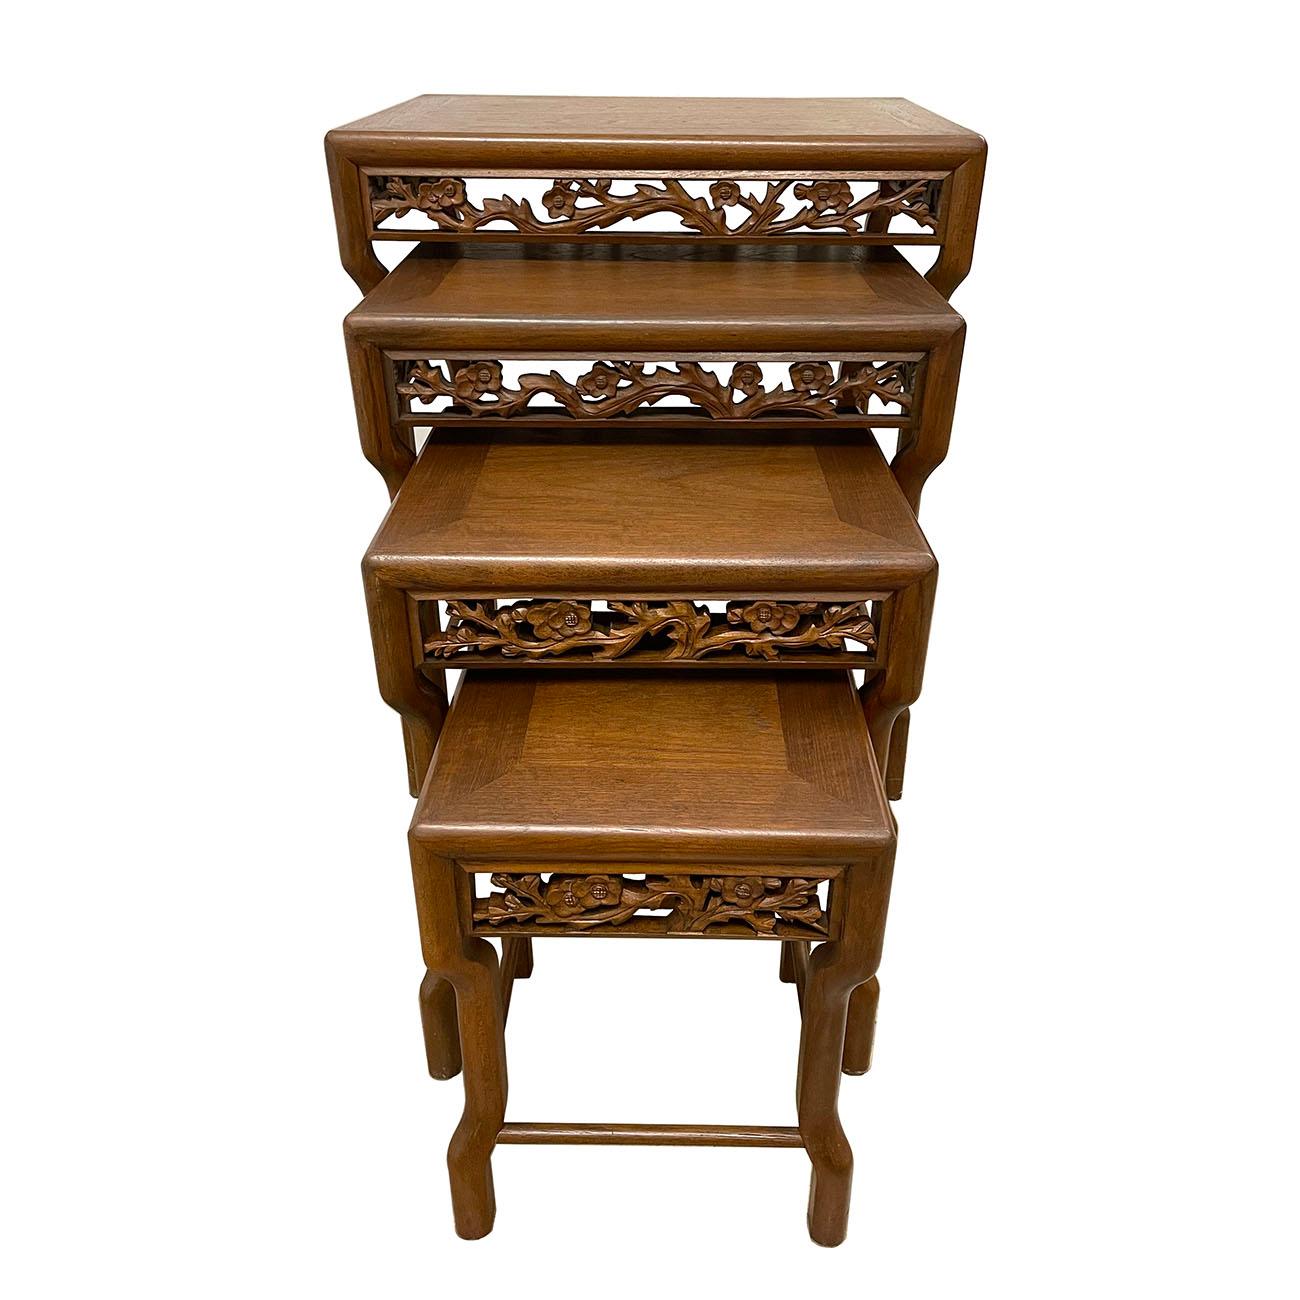 This set of gorgeous Chinese Antique Carved Teak wood Nesting Table were made from solid Teak wood with traditional carving works on all four sides and legs for each table. There are set of 4 tables total. Full of patina. From the pictures, you can